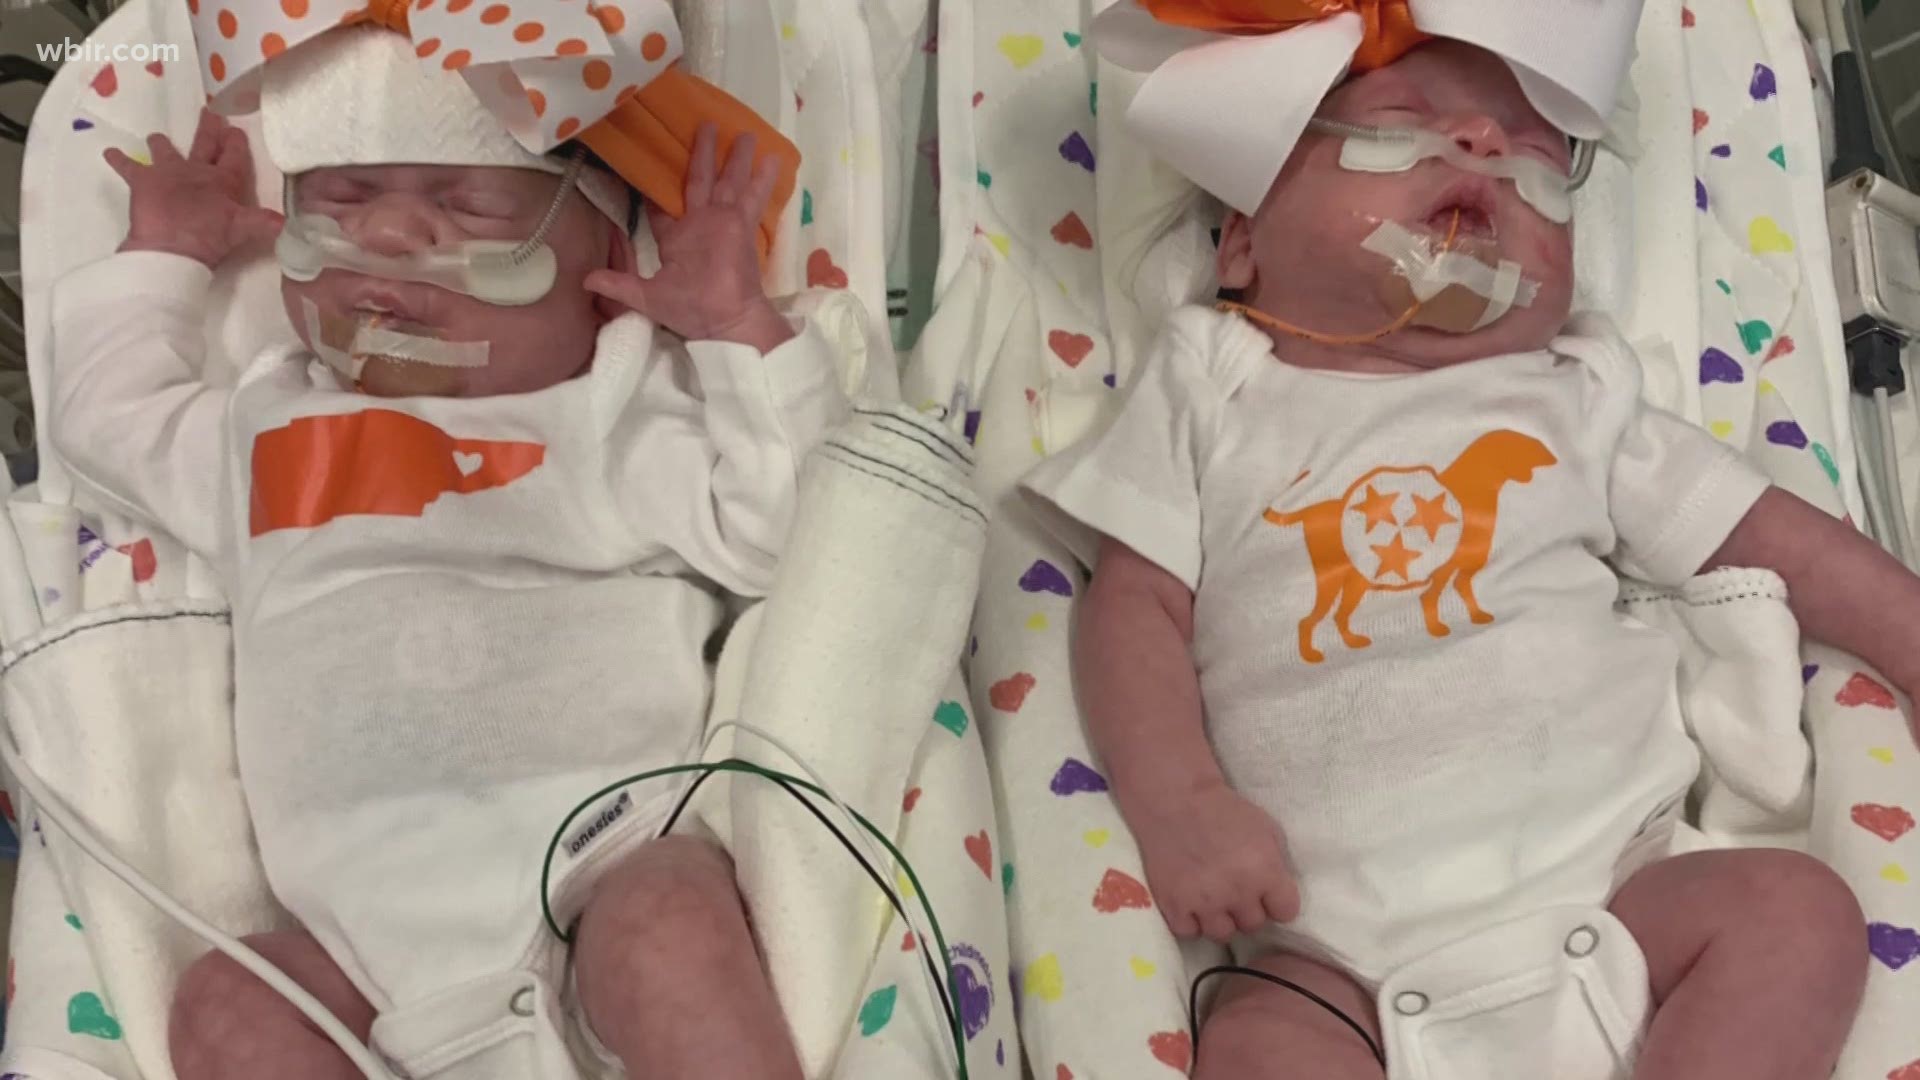 NICU twins who started out as frozen embryos are now home after weeks in the hospital.